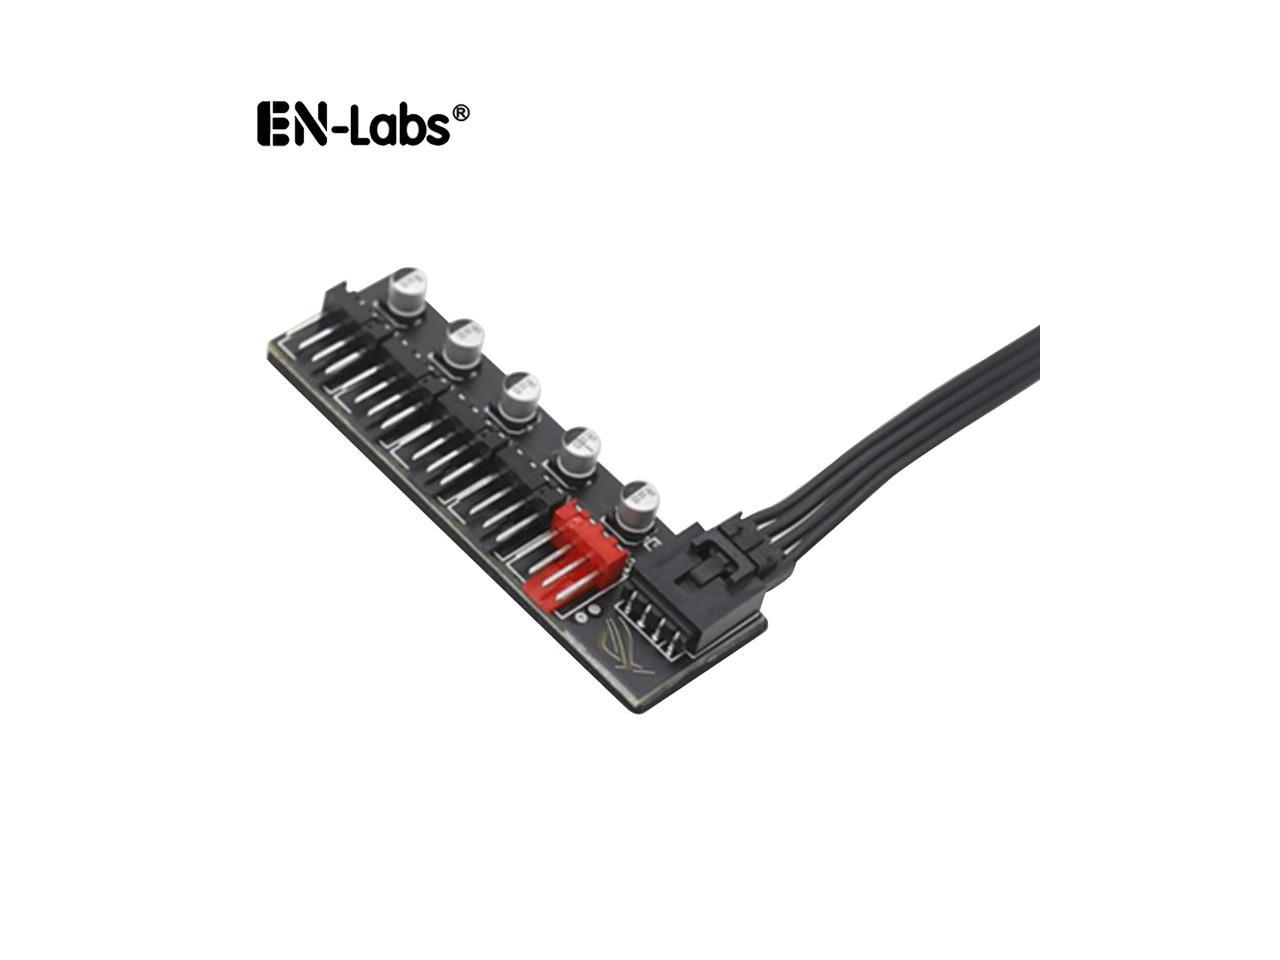 EnLabs PWMHUB5 5 Ports 4Pin PWM Fan Splitter Hub Cable,Motherboard 4 pin to  5 way Fan Power Cable for 12V Computer Fans